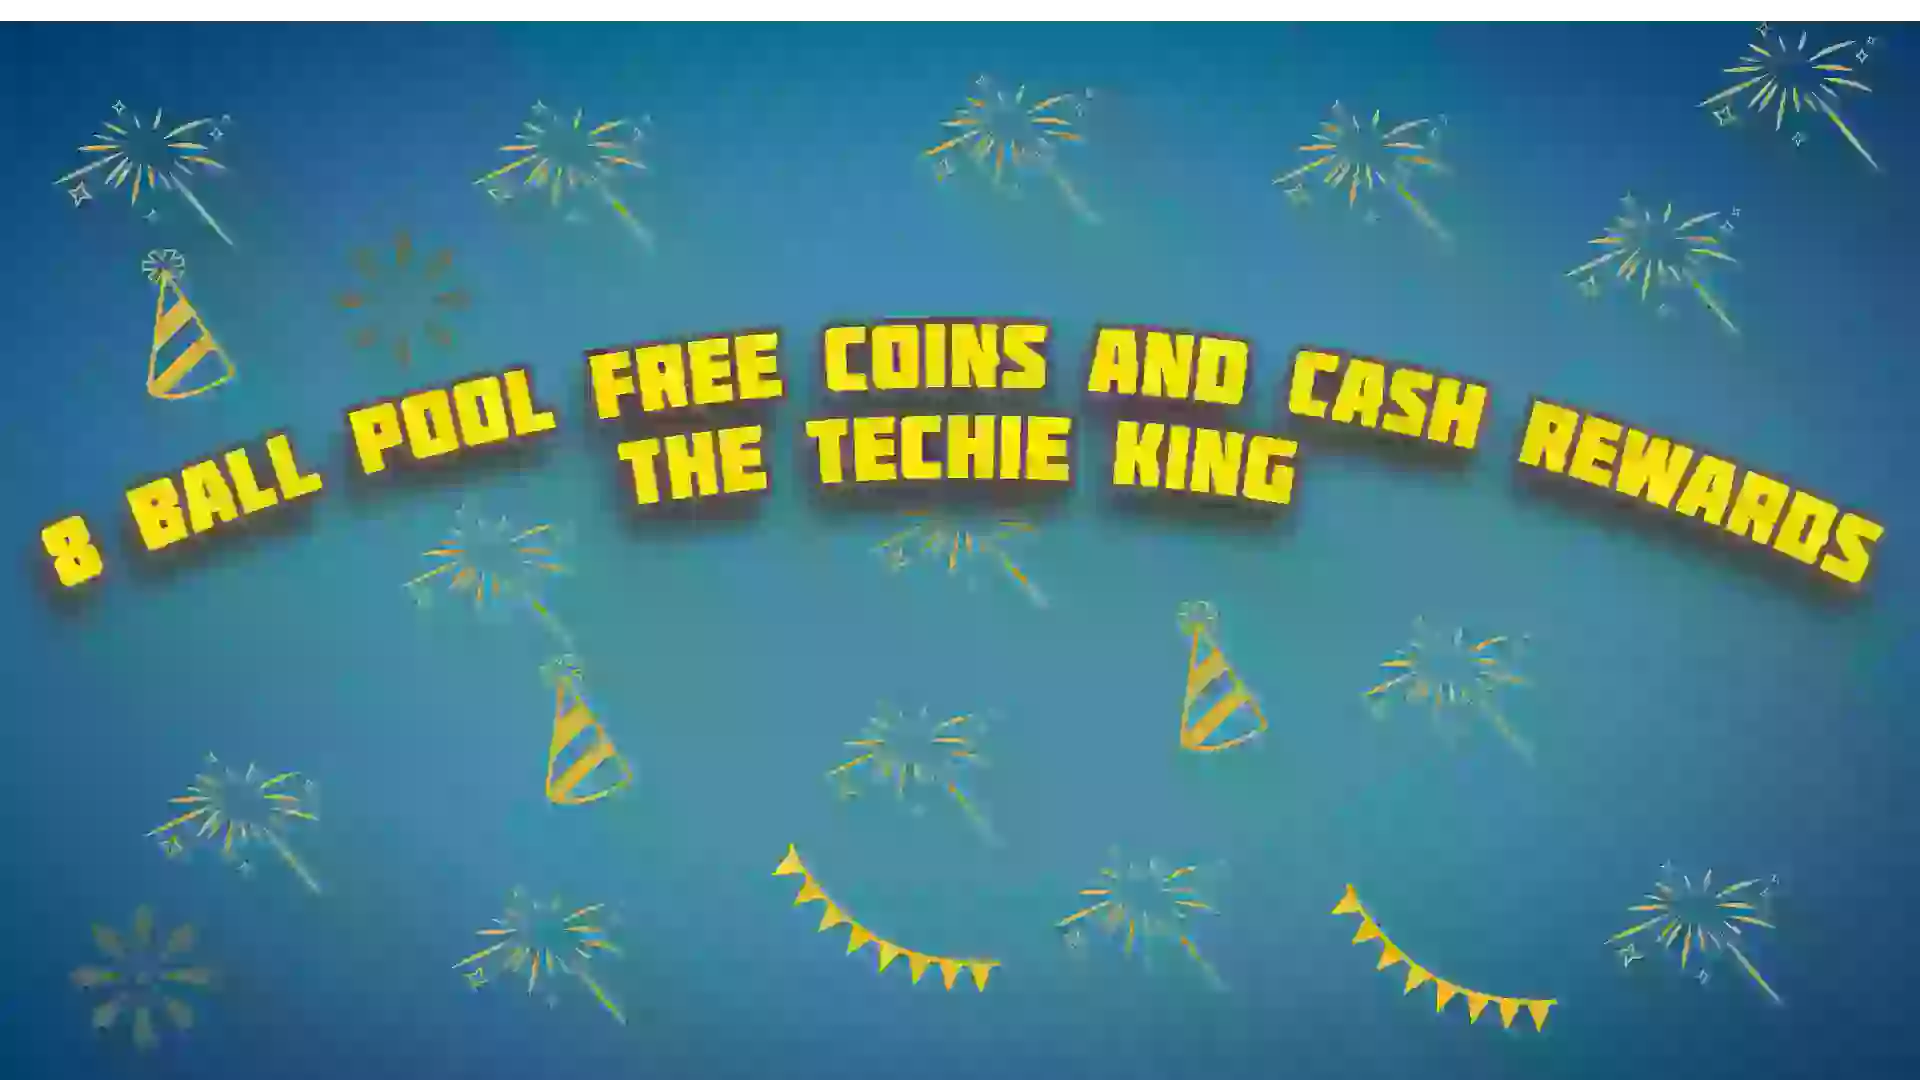 8 Ball pool free coins and cash